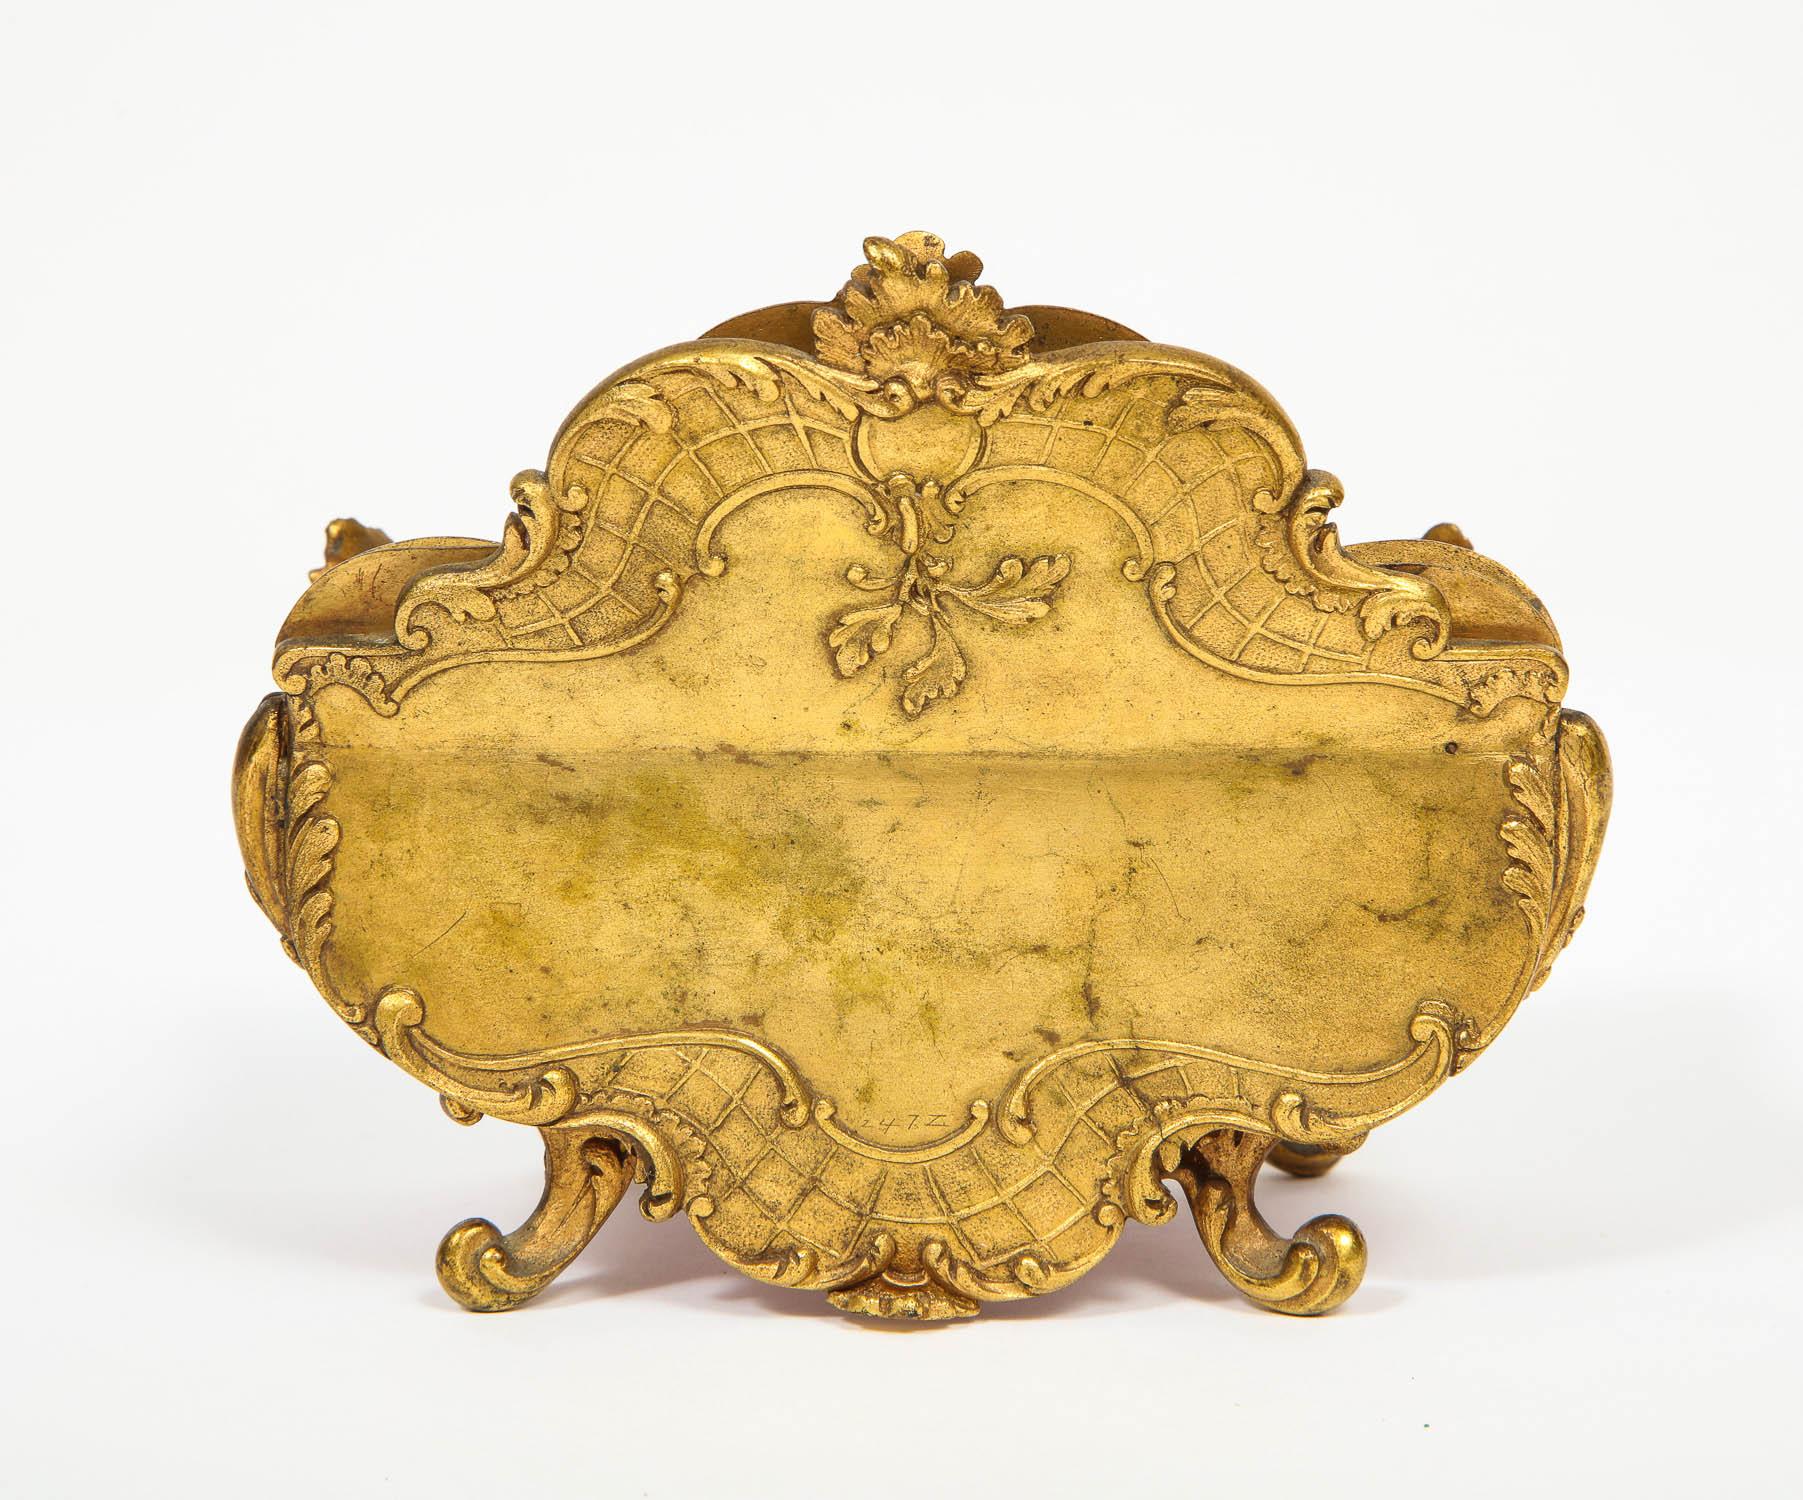 19th Century French Gilt-Bronze and Pink Sèvres Porcelain Inkwell & Letter Holder, circa 1880